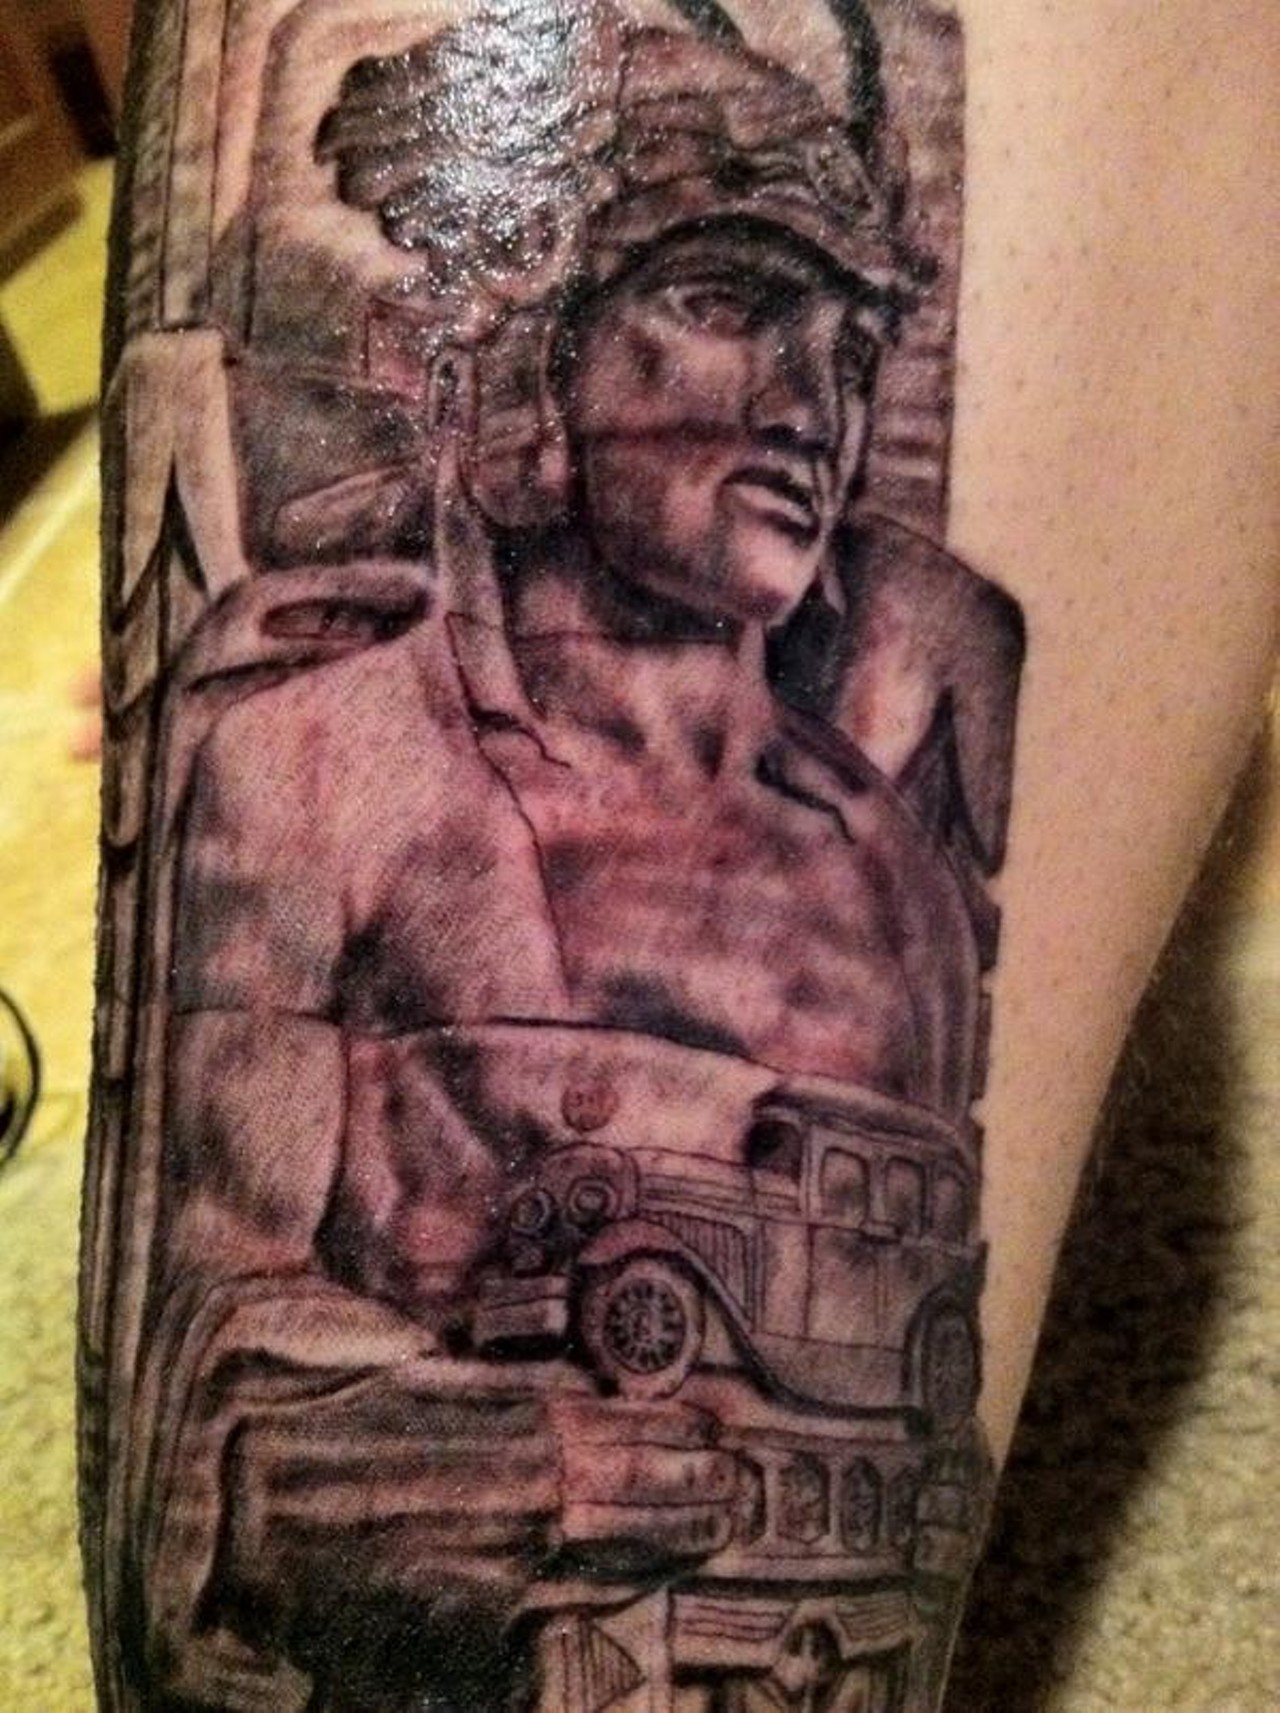 The Guardians of Traffic dominate the ends of the Hope Memorial Bridge. This tattoo of the Cleveland icon is beautifully done with an obvious attention to detail (Photo courtesy of Twitter user @prohr21).